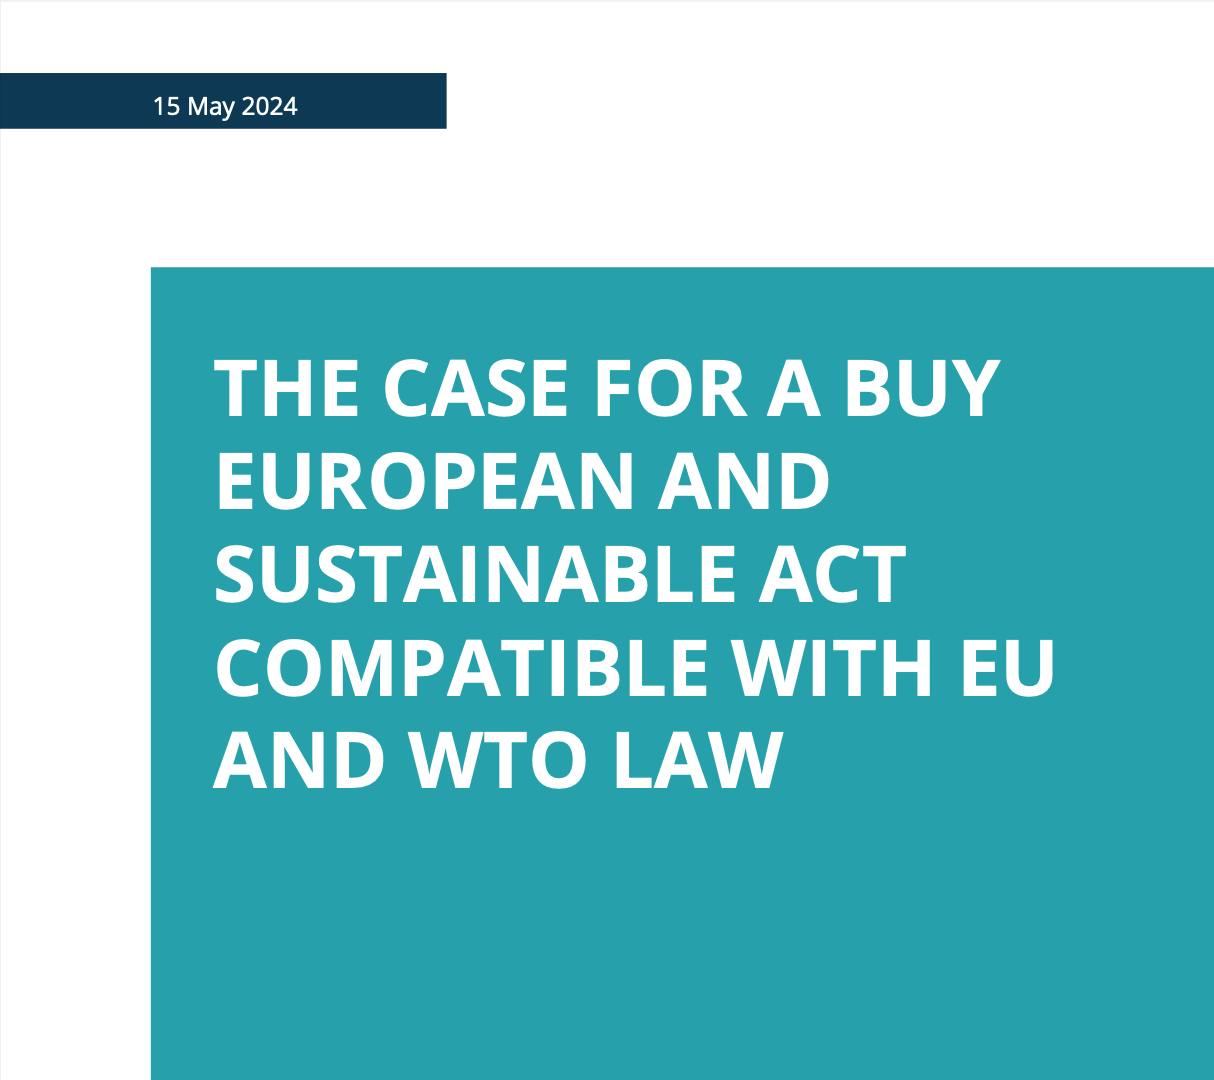 The case for a Buy European and Sustainable Act compatible with EU and WTO law